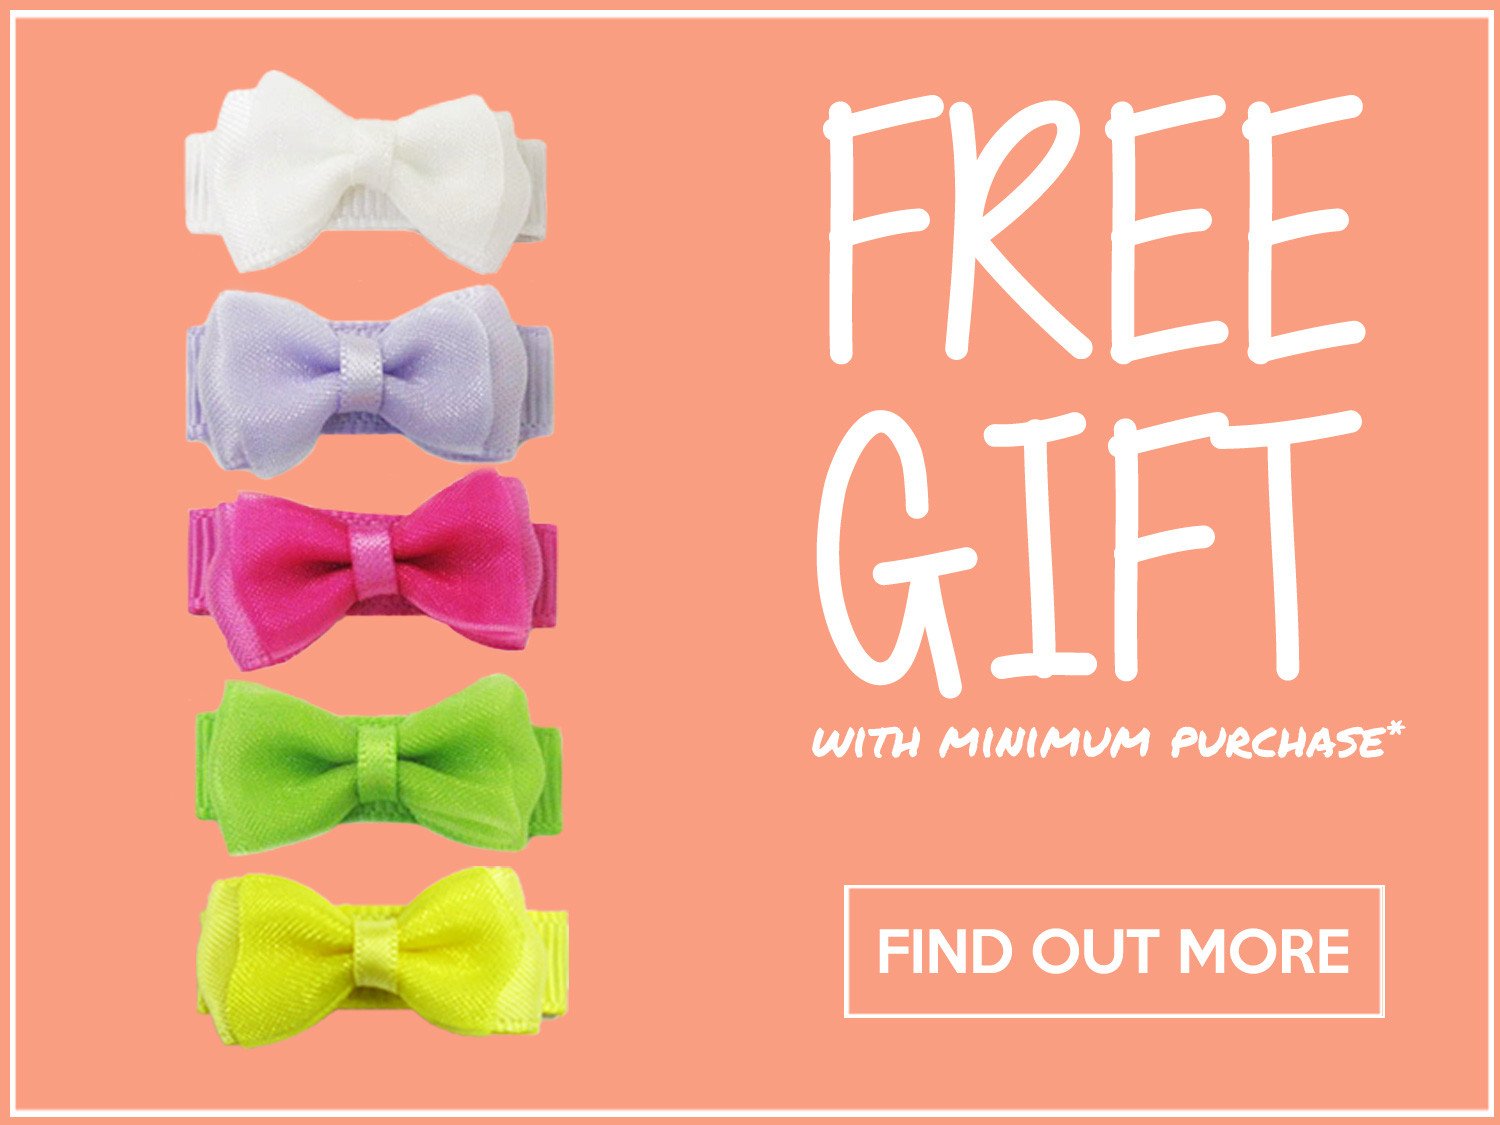 Summer Garden Hair Bow Collection FREE with minimum purchase